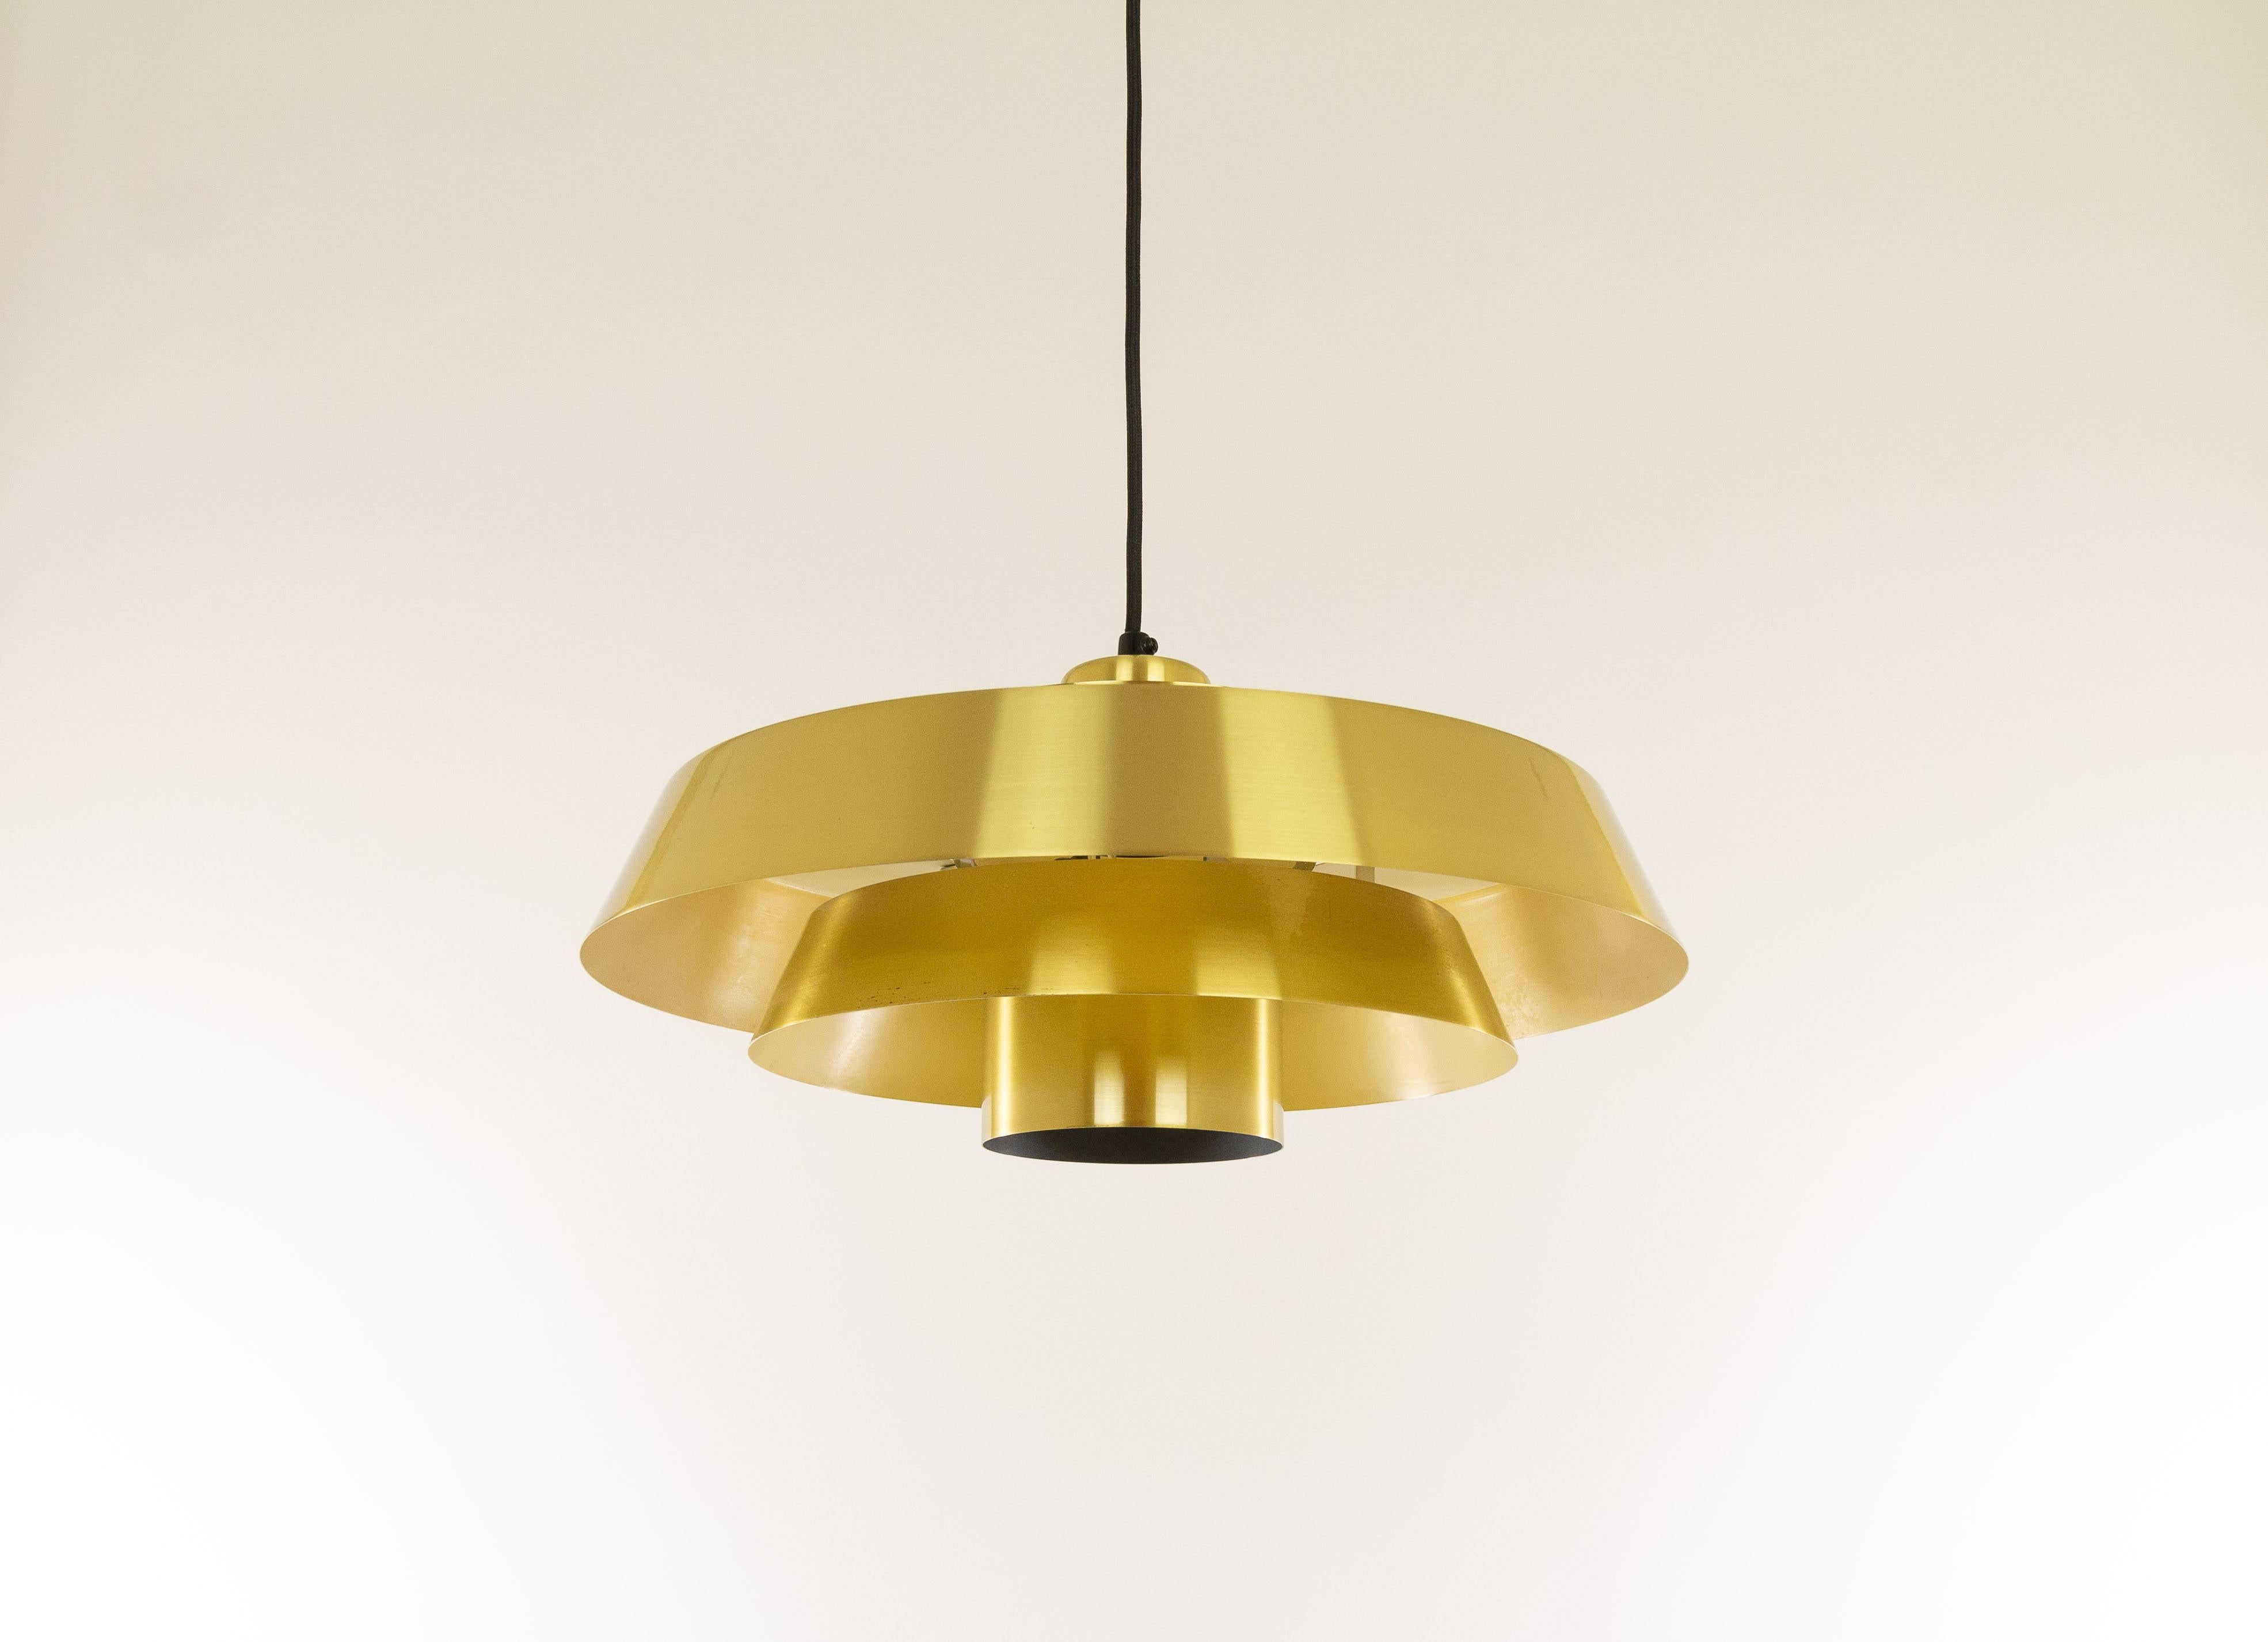 Brass Nova pendant designed in the 1960s by Jo Hammerborg, main designer of Danish lighting manufacturer Fog & Mørup in the 1960s and 1970s.

'Nova' was produced in three different metals: copper, brass and aluminium. This is the brass version; on